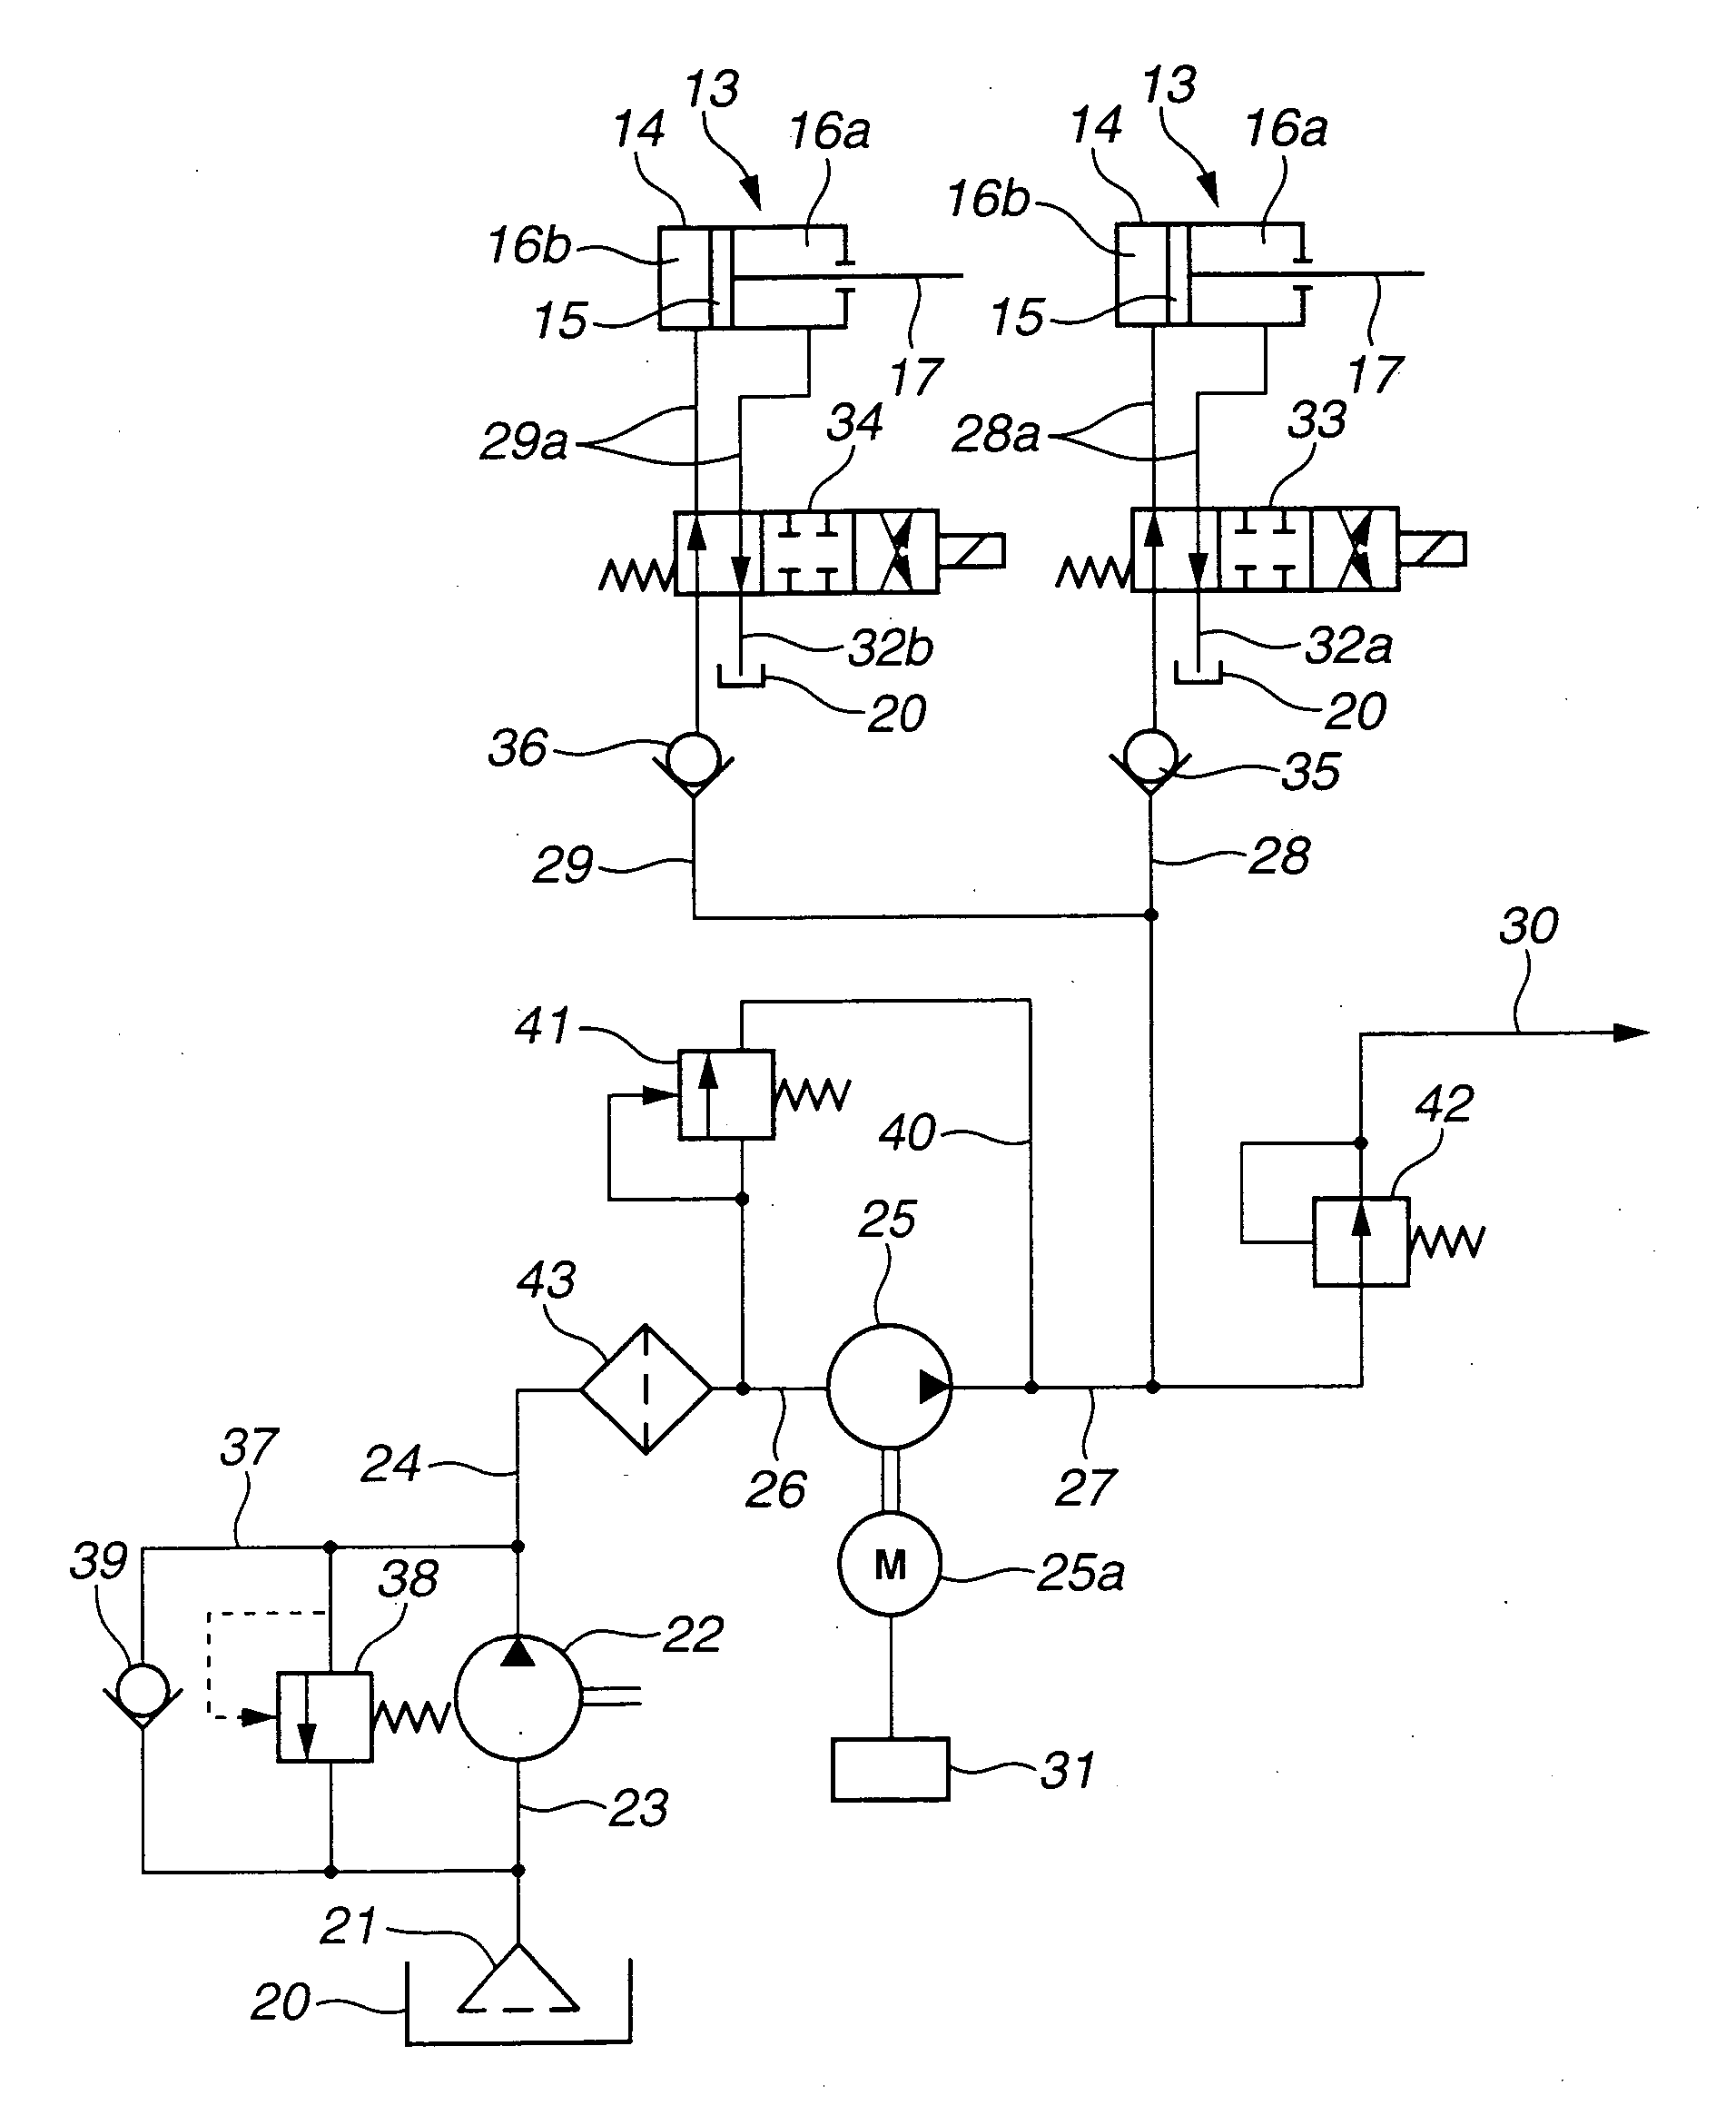 Lubricating oil supplying system for internal combustion engine